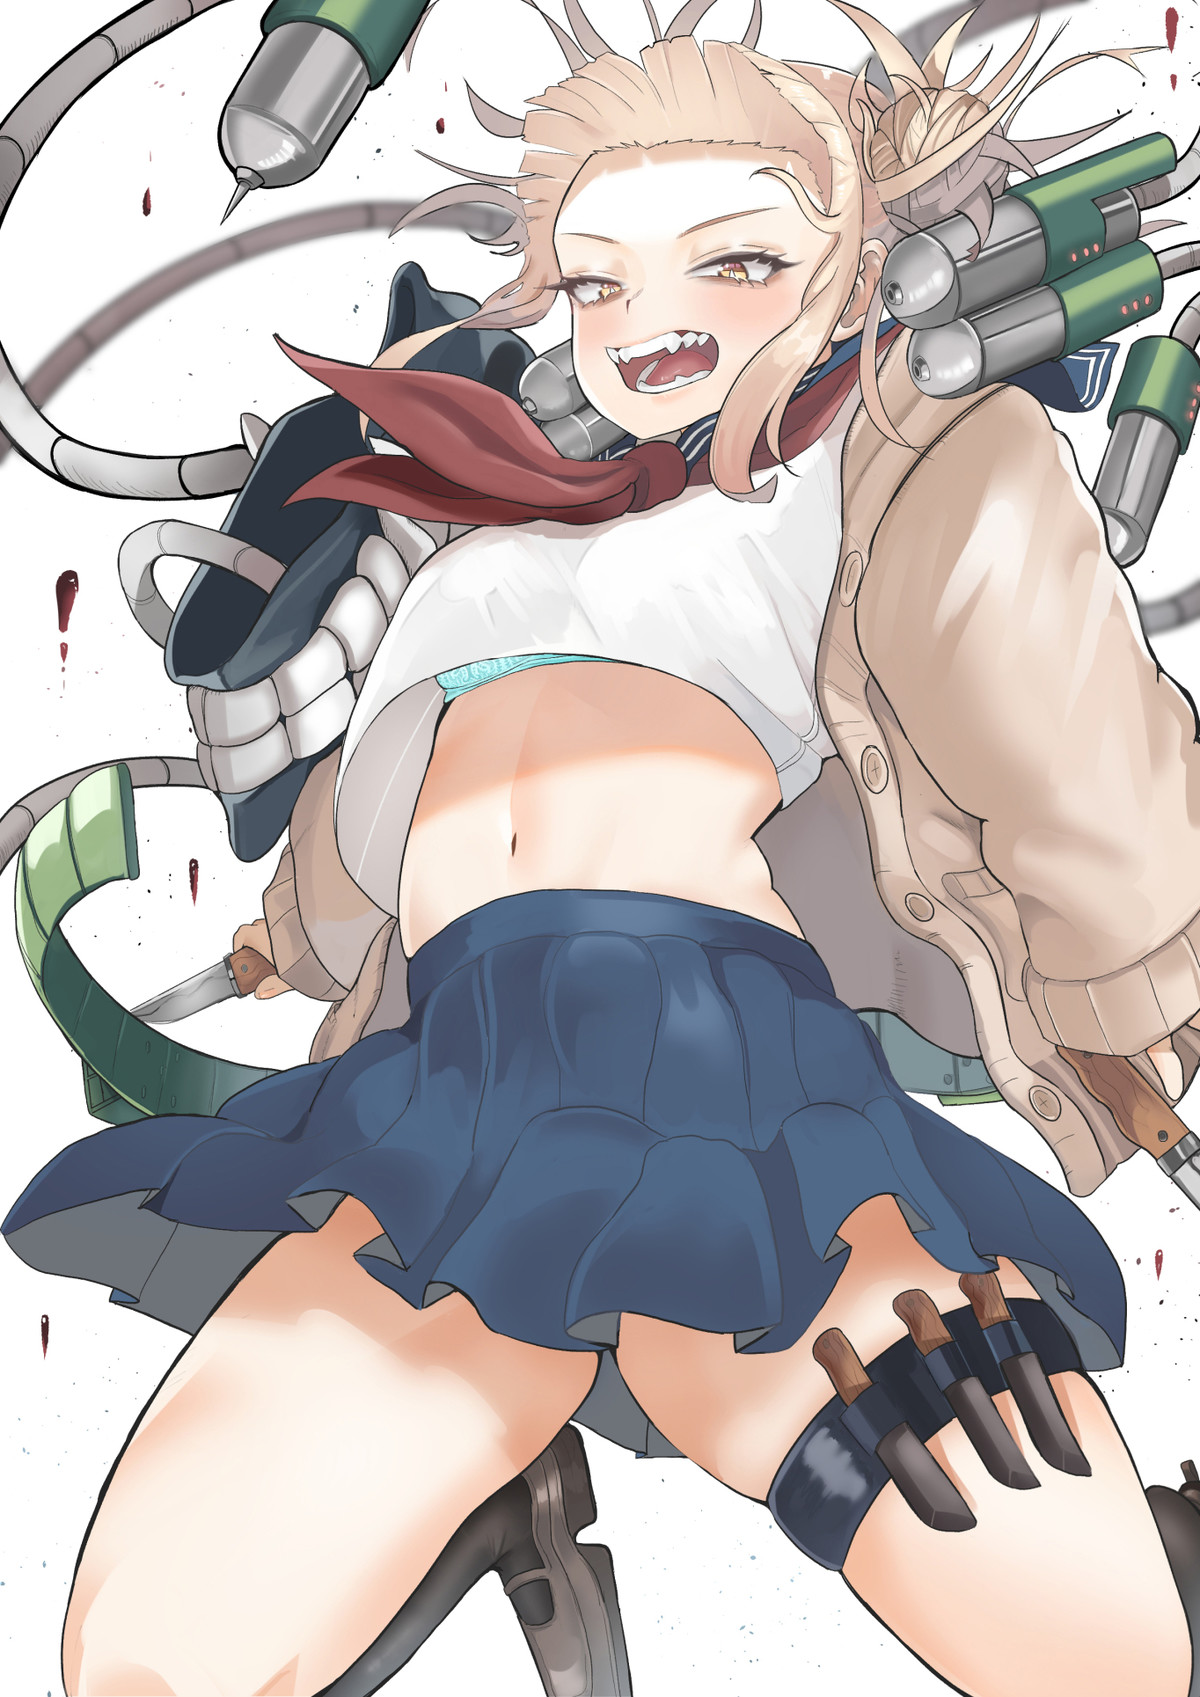 Daily Toga - 972: Falling Toga. join list: DailyToga (477 subs)Mention History Source: .. Volodia a yandere tummy